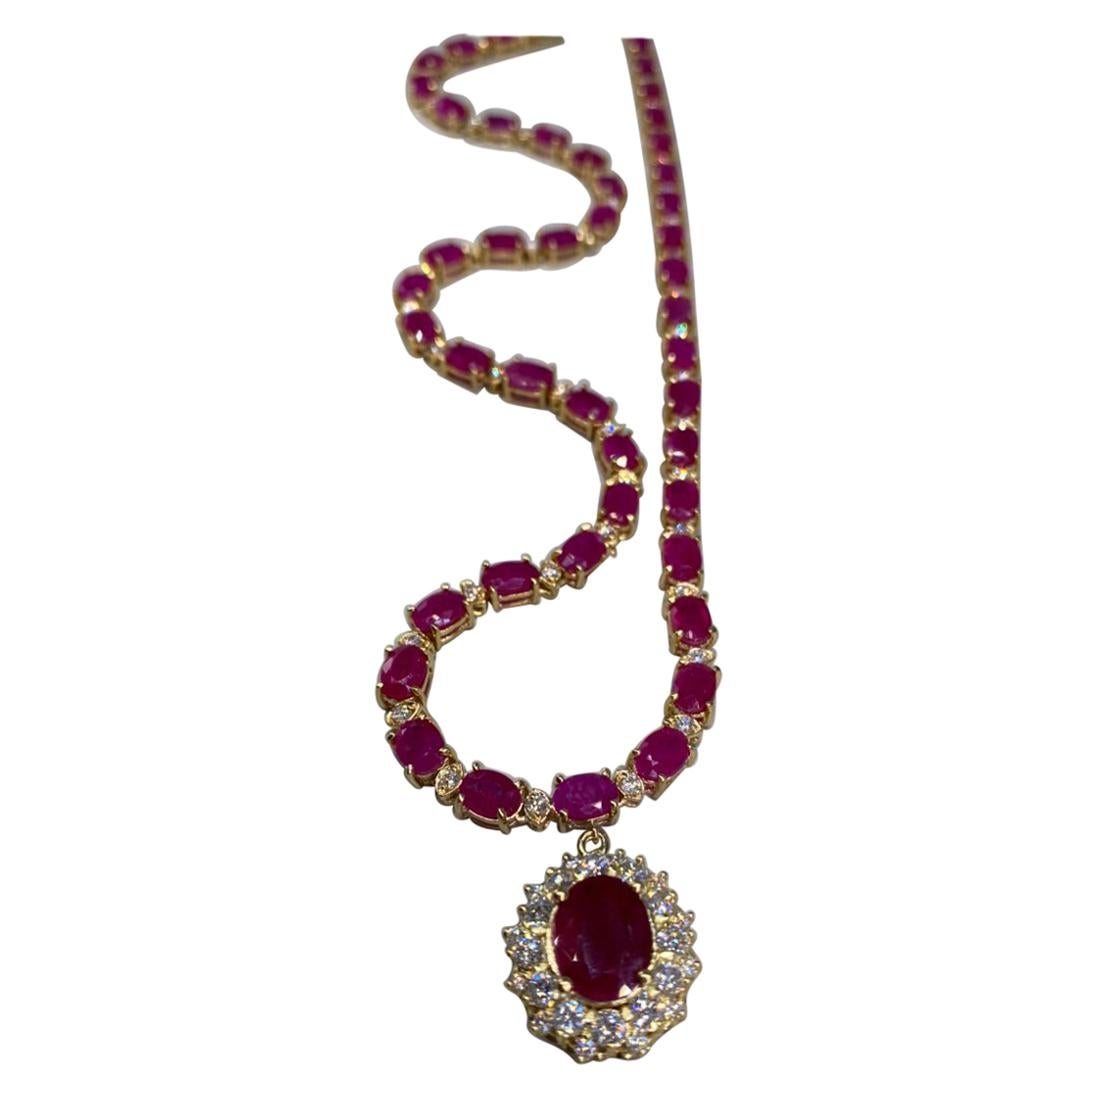 44.60 CTW Ruby 18K Yellow Gold Diamond necklace

Stamped: 18K
Total Necklace Weight: 28.7 Grams
Necklace Length: 18.5 Inches
Center Ruby Weight: 3.50 Carat (10.00x8.00 Millimeters)
Side Ruby Weight: 38.90 (7.00x5.00 Millimeters)
Diamond Weight: 2.20